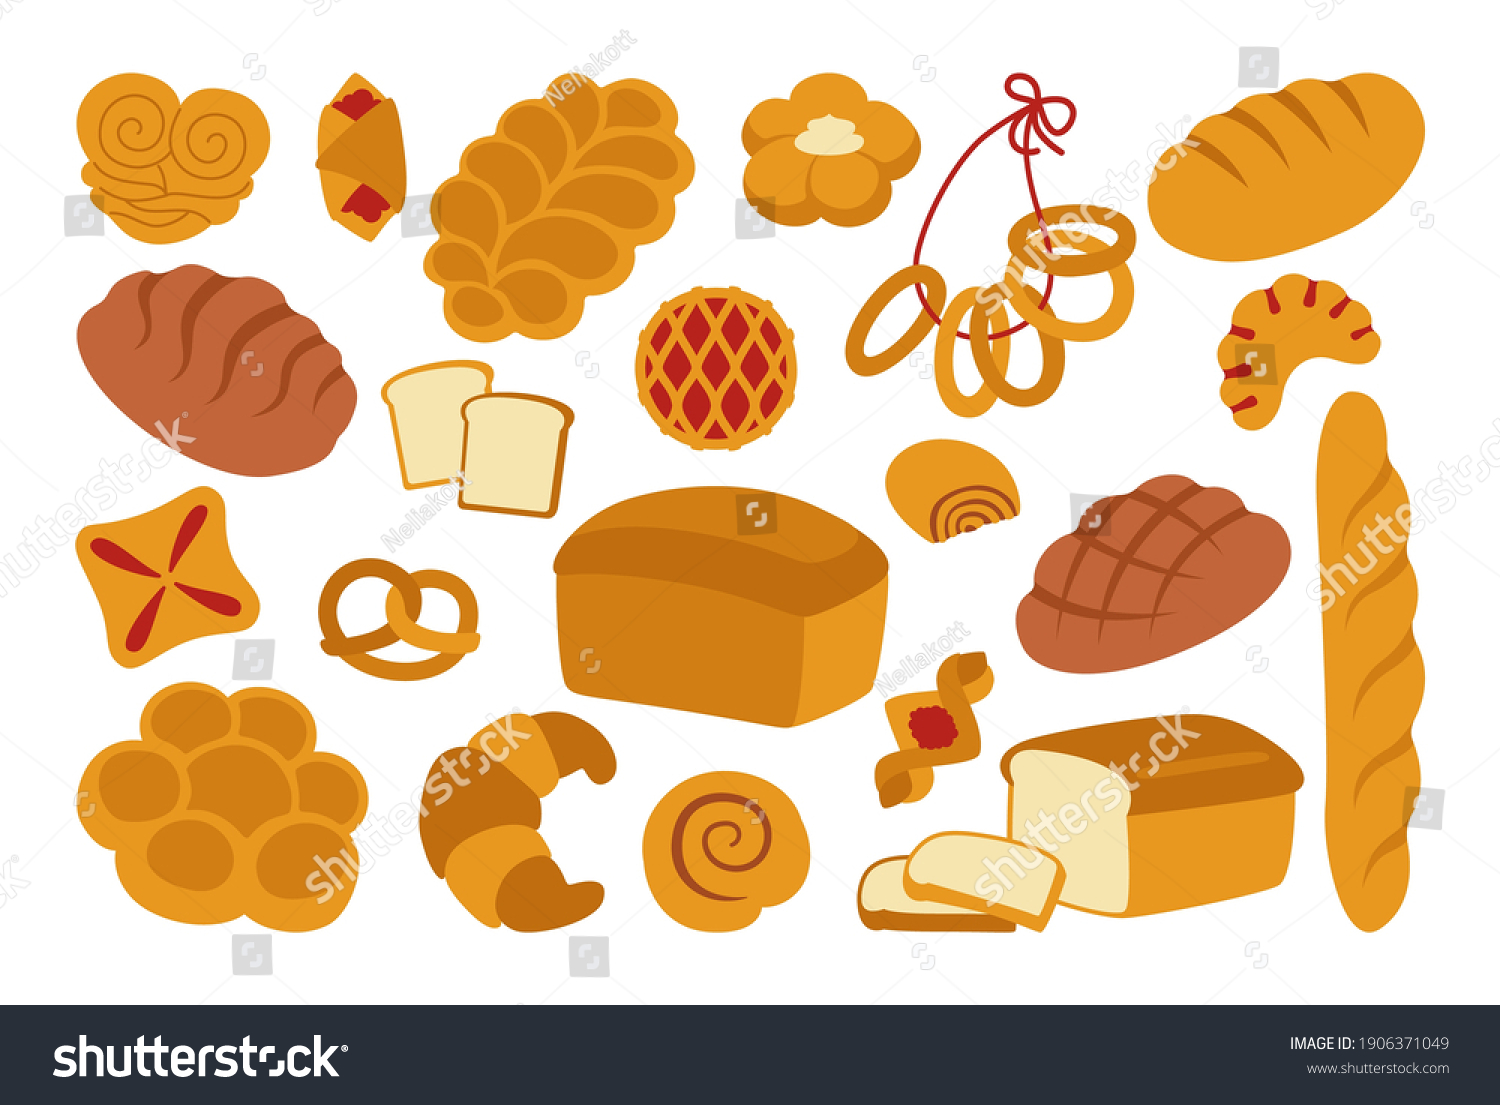 Bread flat icon set. Simple whole grain and wheat loaf bread, pretzel, muffin, croissant, french baguette. Organic baked goods, shop food, design menu bakery pastry. Vintage vector illustration #1906371049